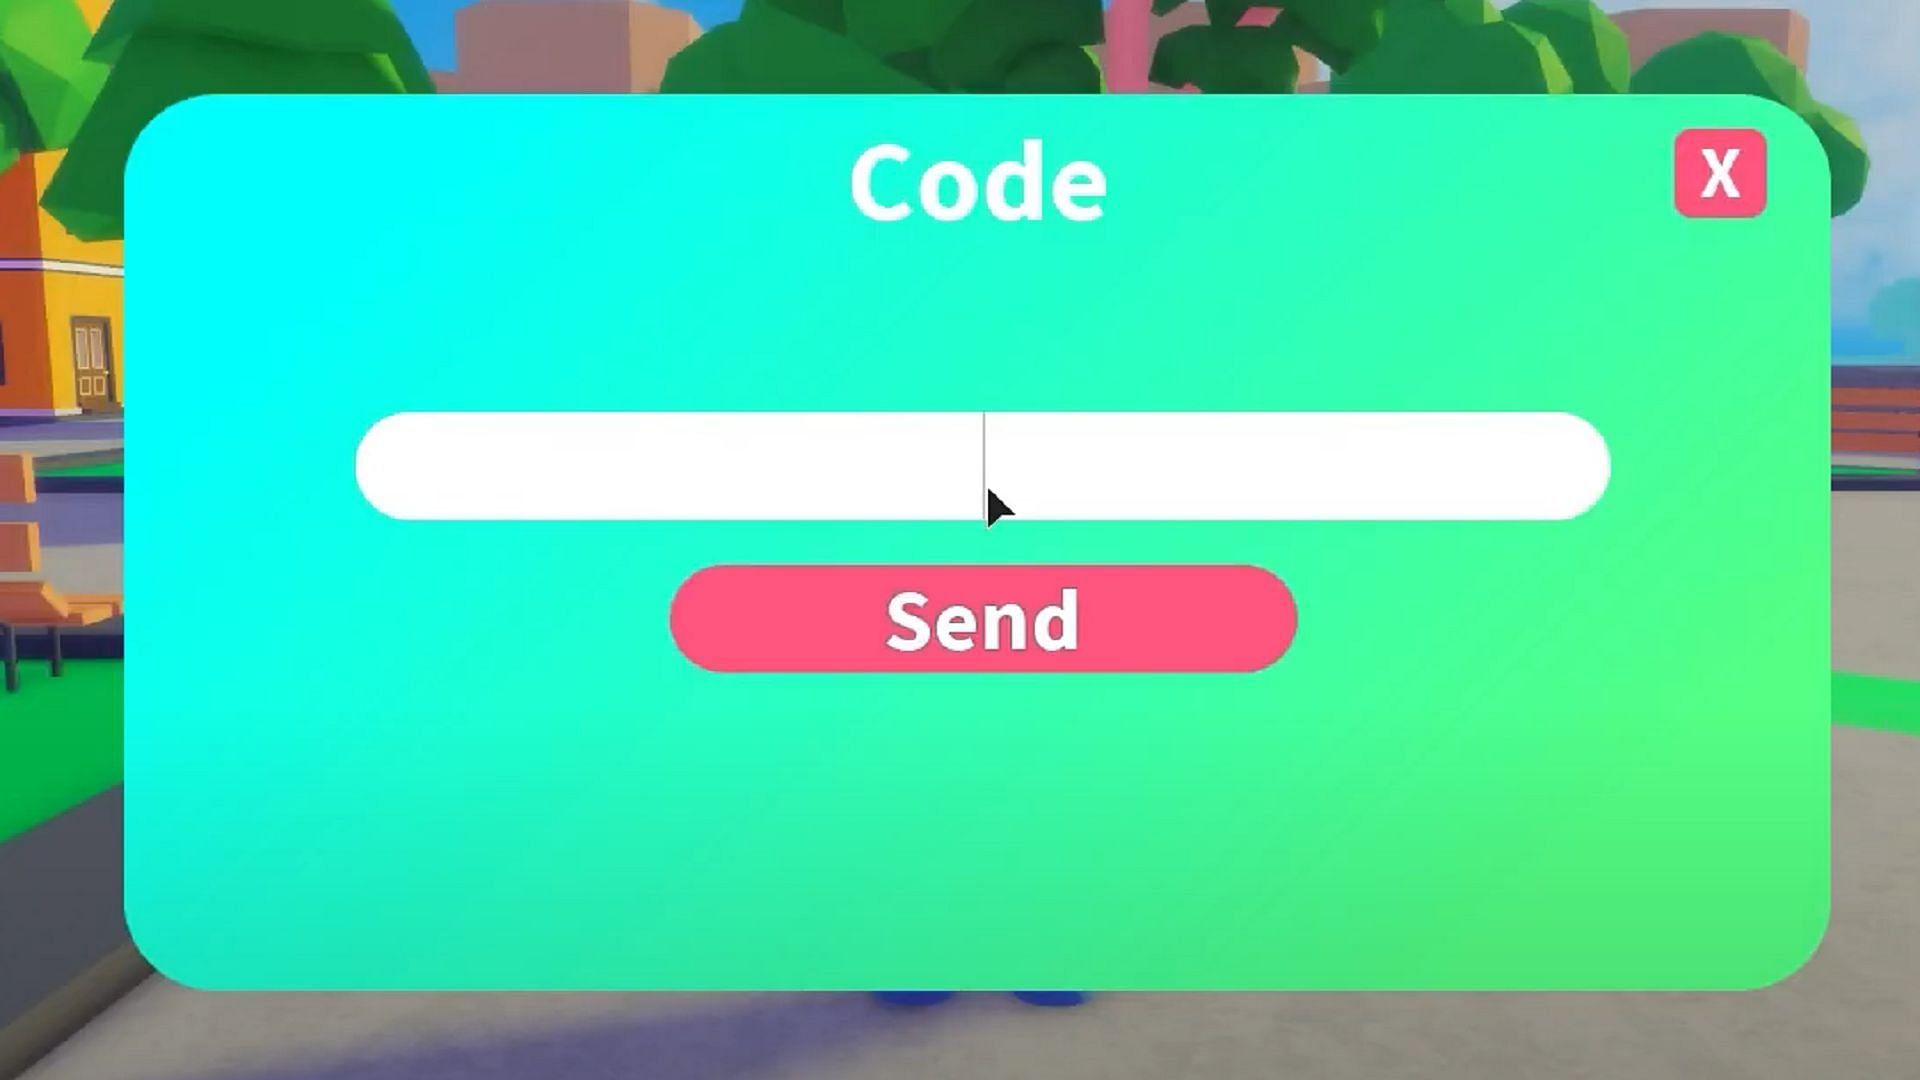 The code redemption page for Shonen Verse (Image via Roblox)